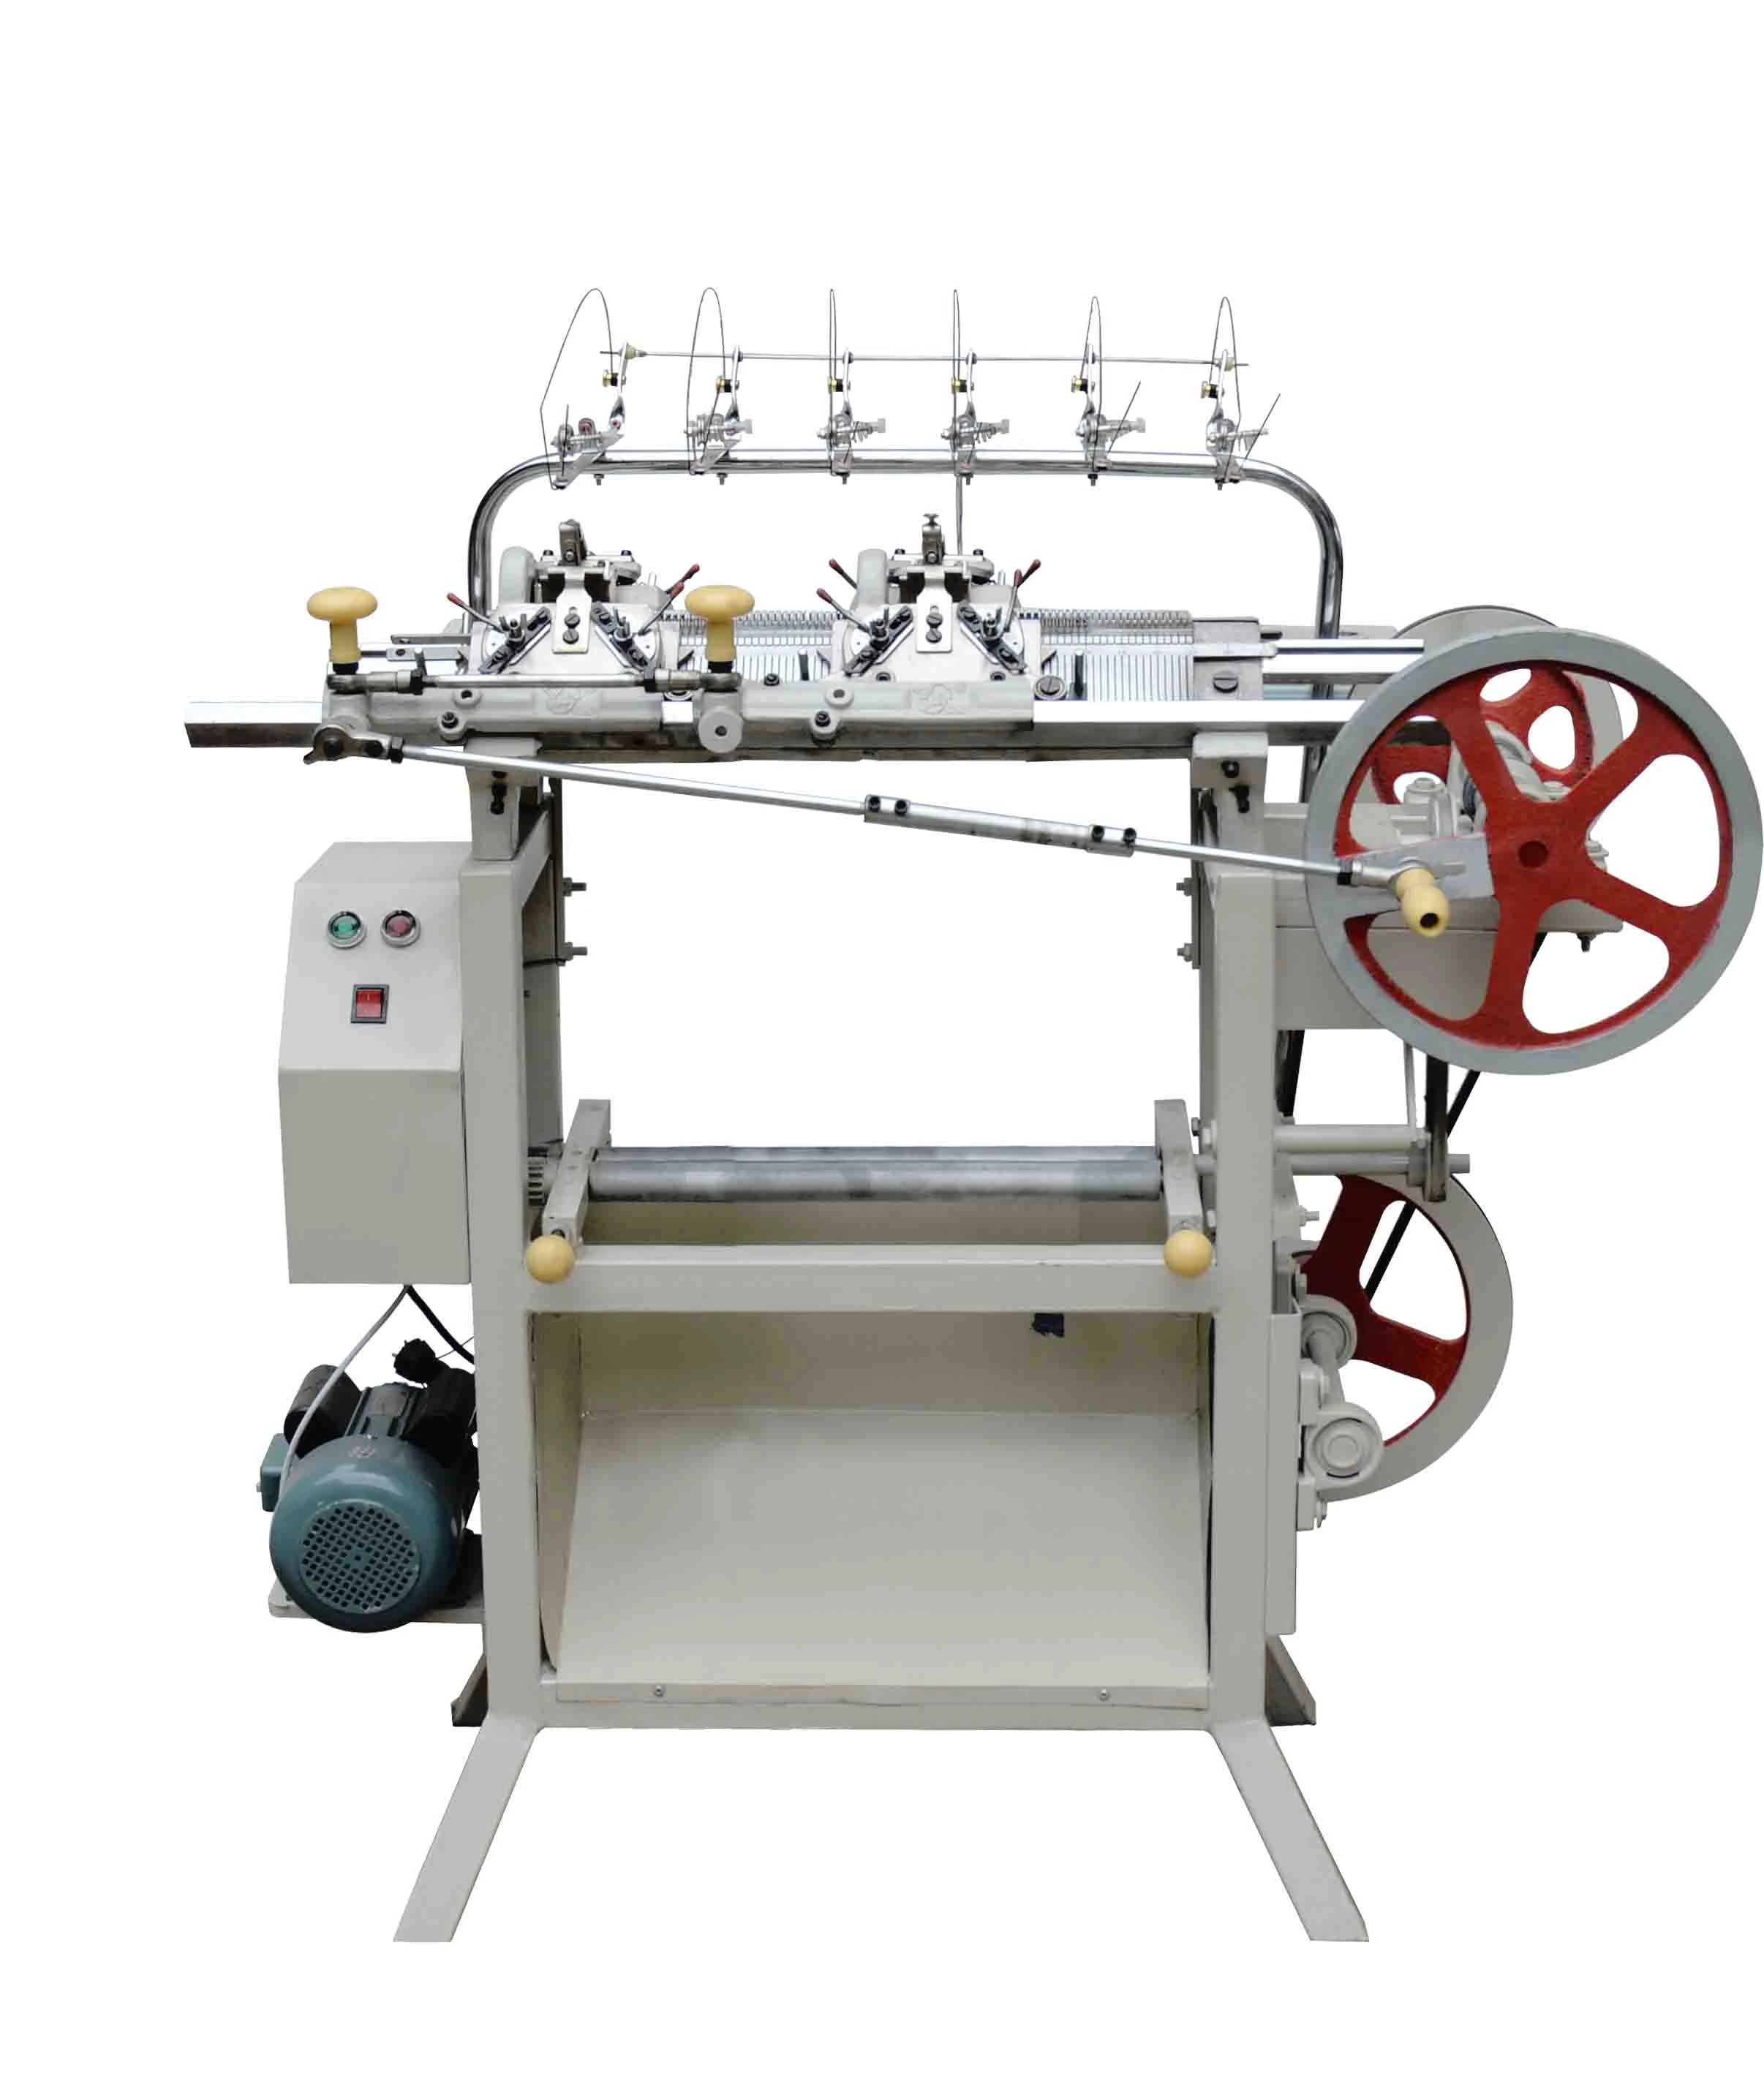 placket sewing machine manufacturer for home,wool knitting machine sales